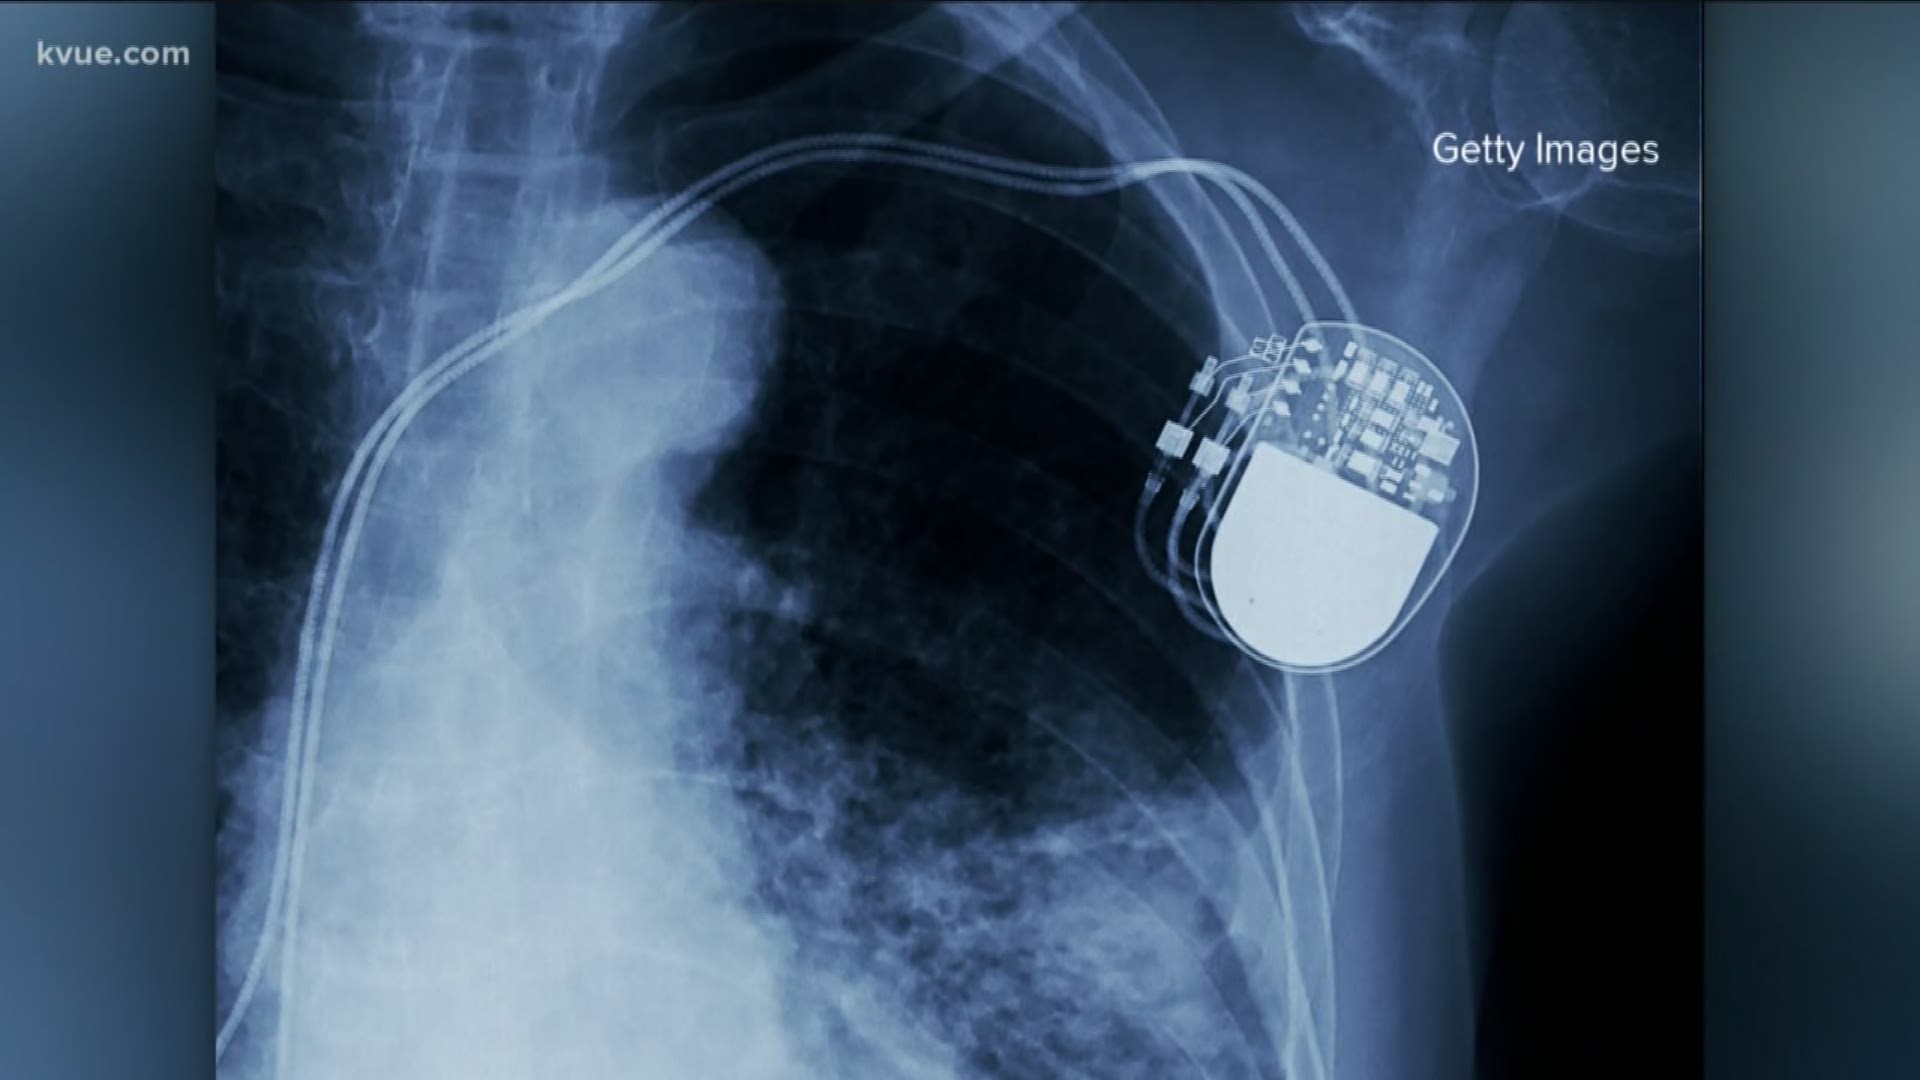 Lawmakers are proposing changes to make it easier to track medical devices.